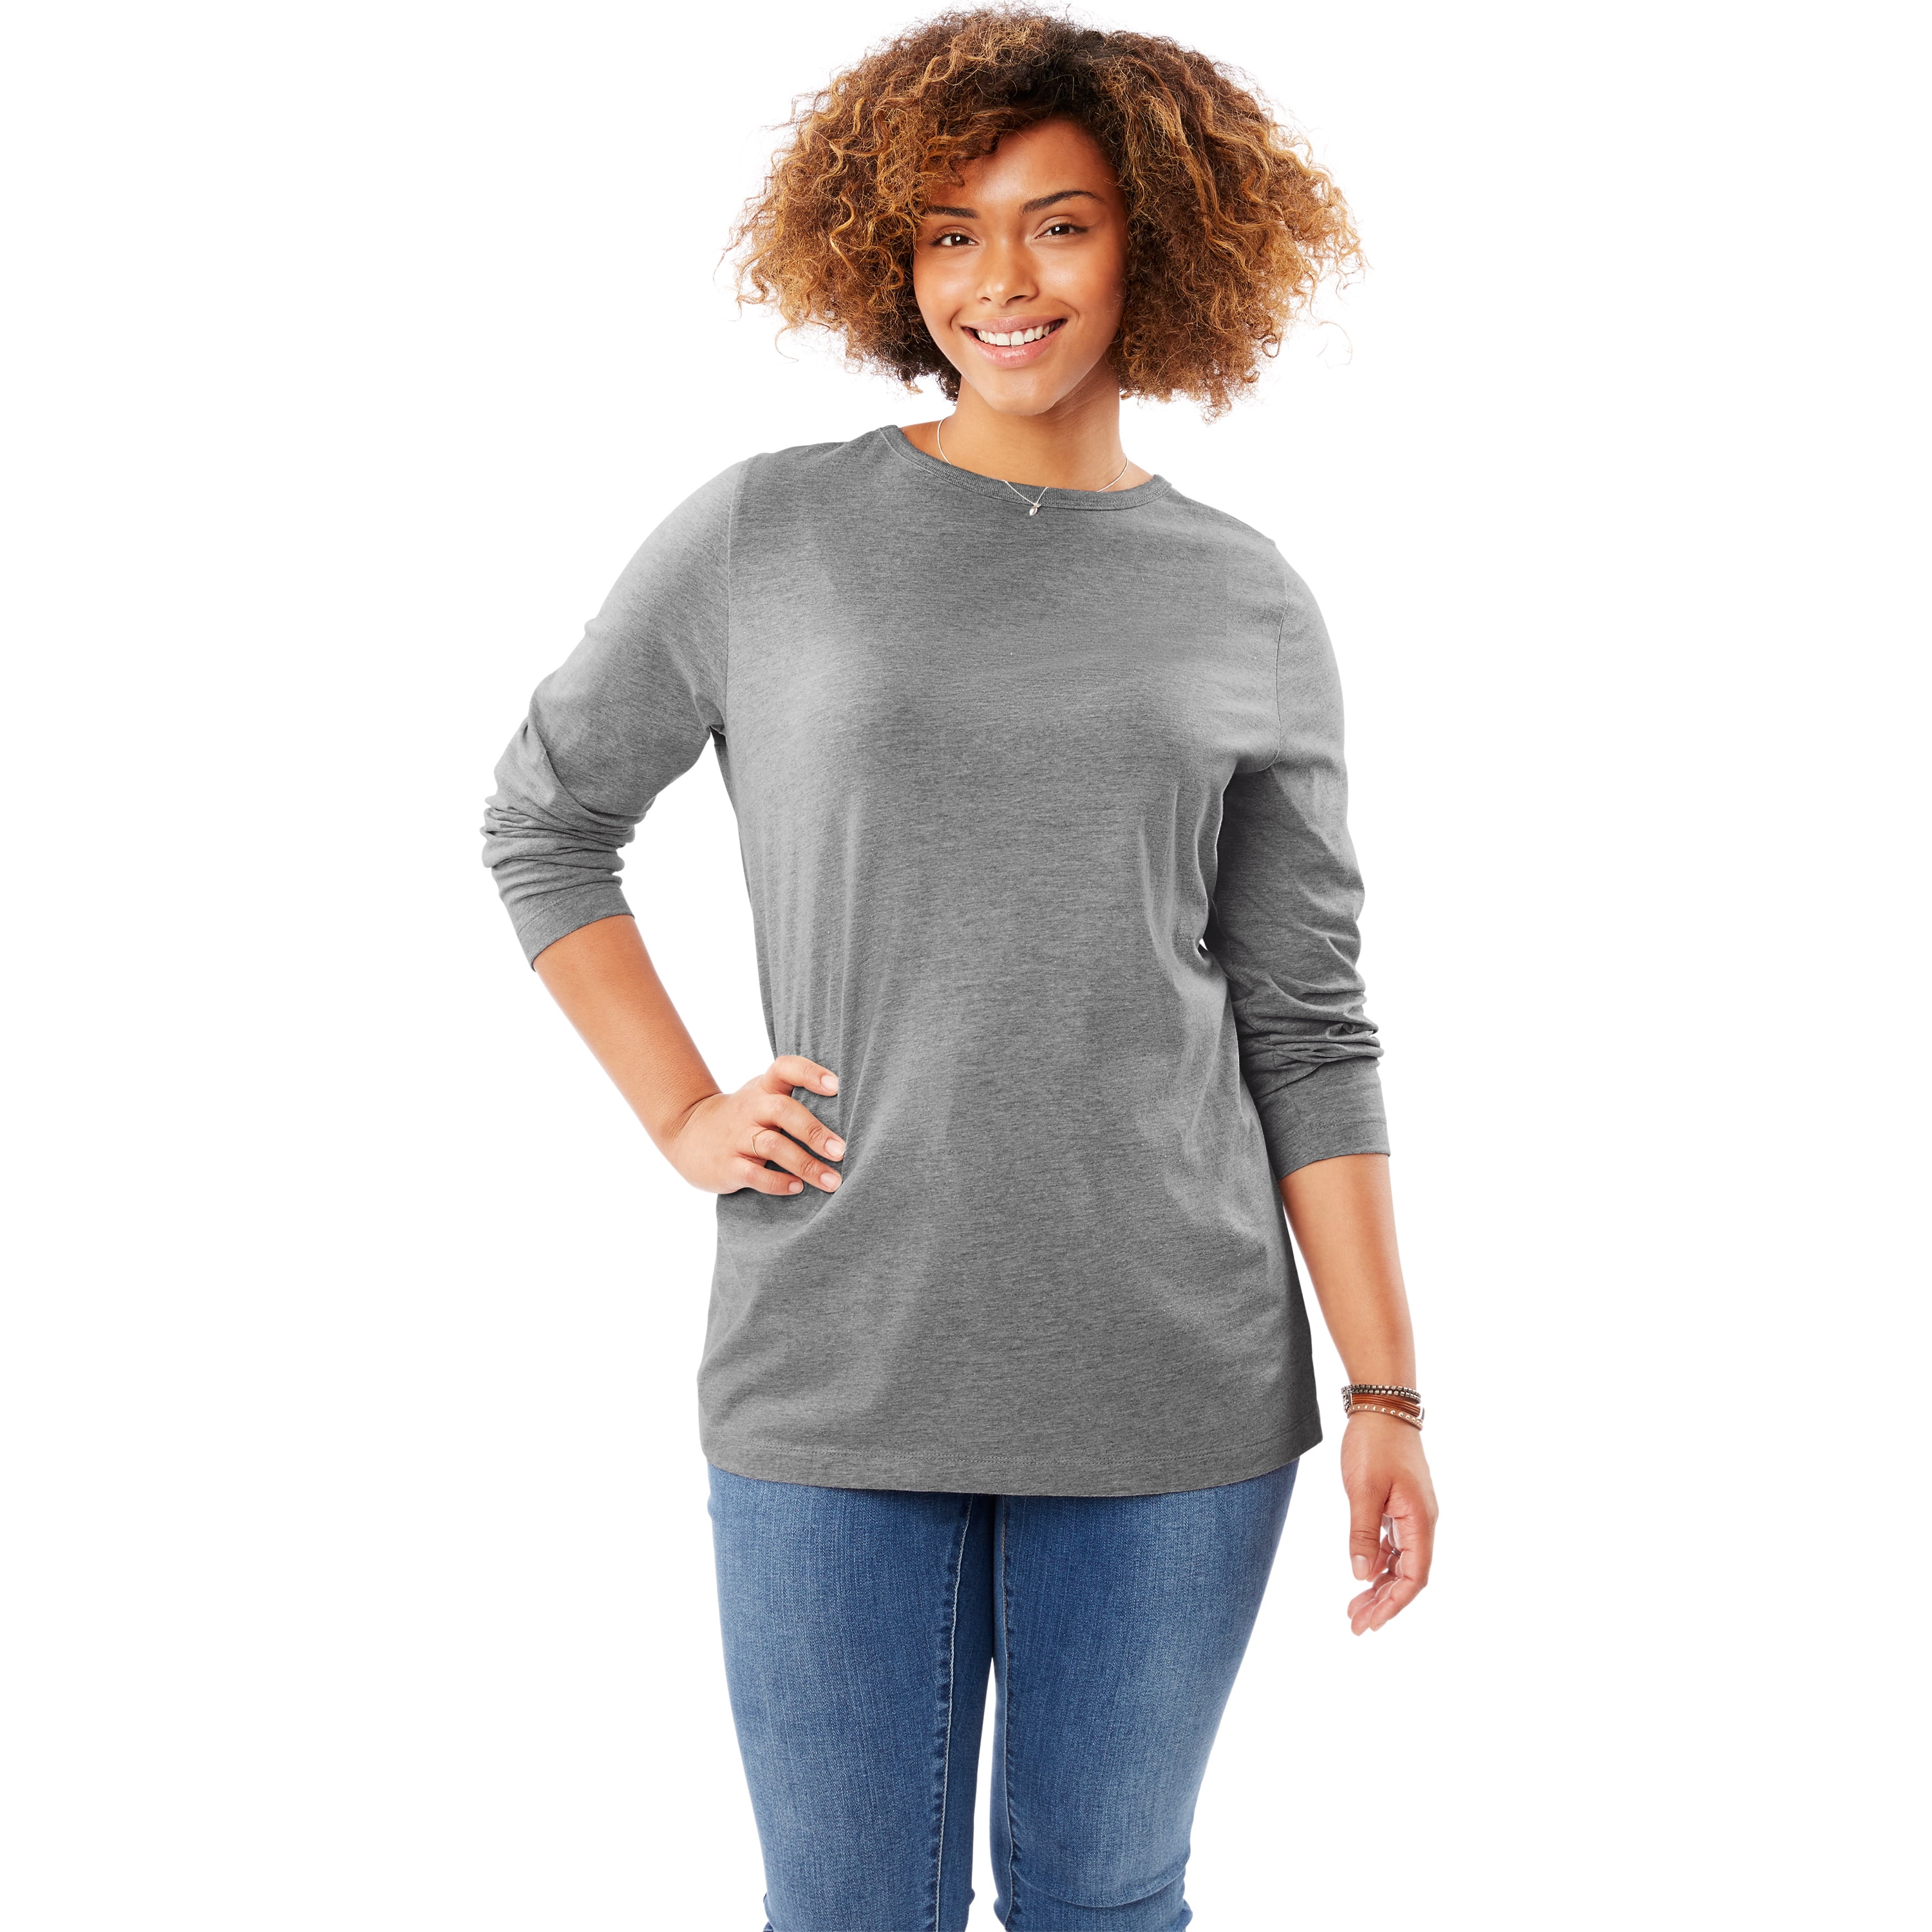 Woman Within Women's Plus Size Perfect Long-Sleeve Crewneck Tee Shirt 